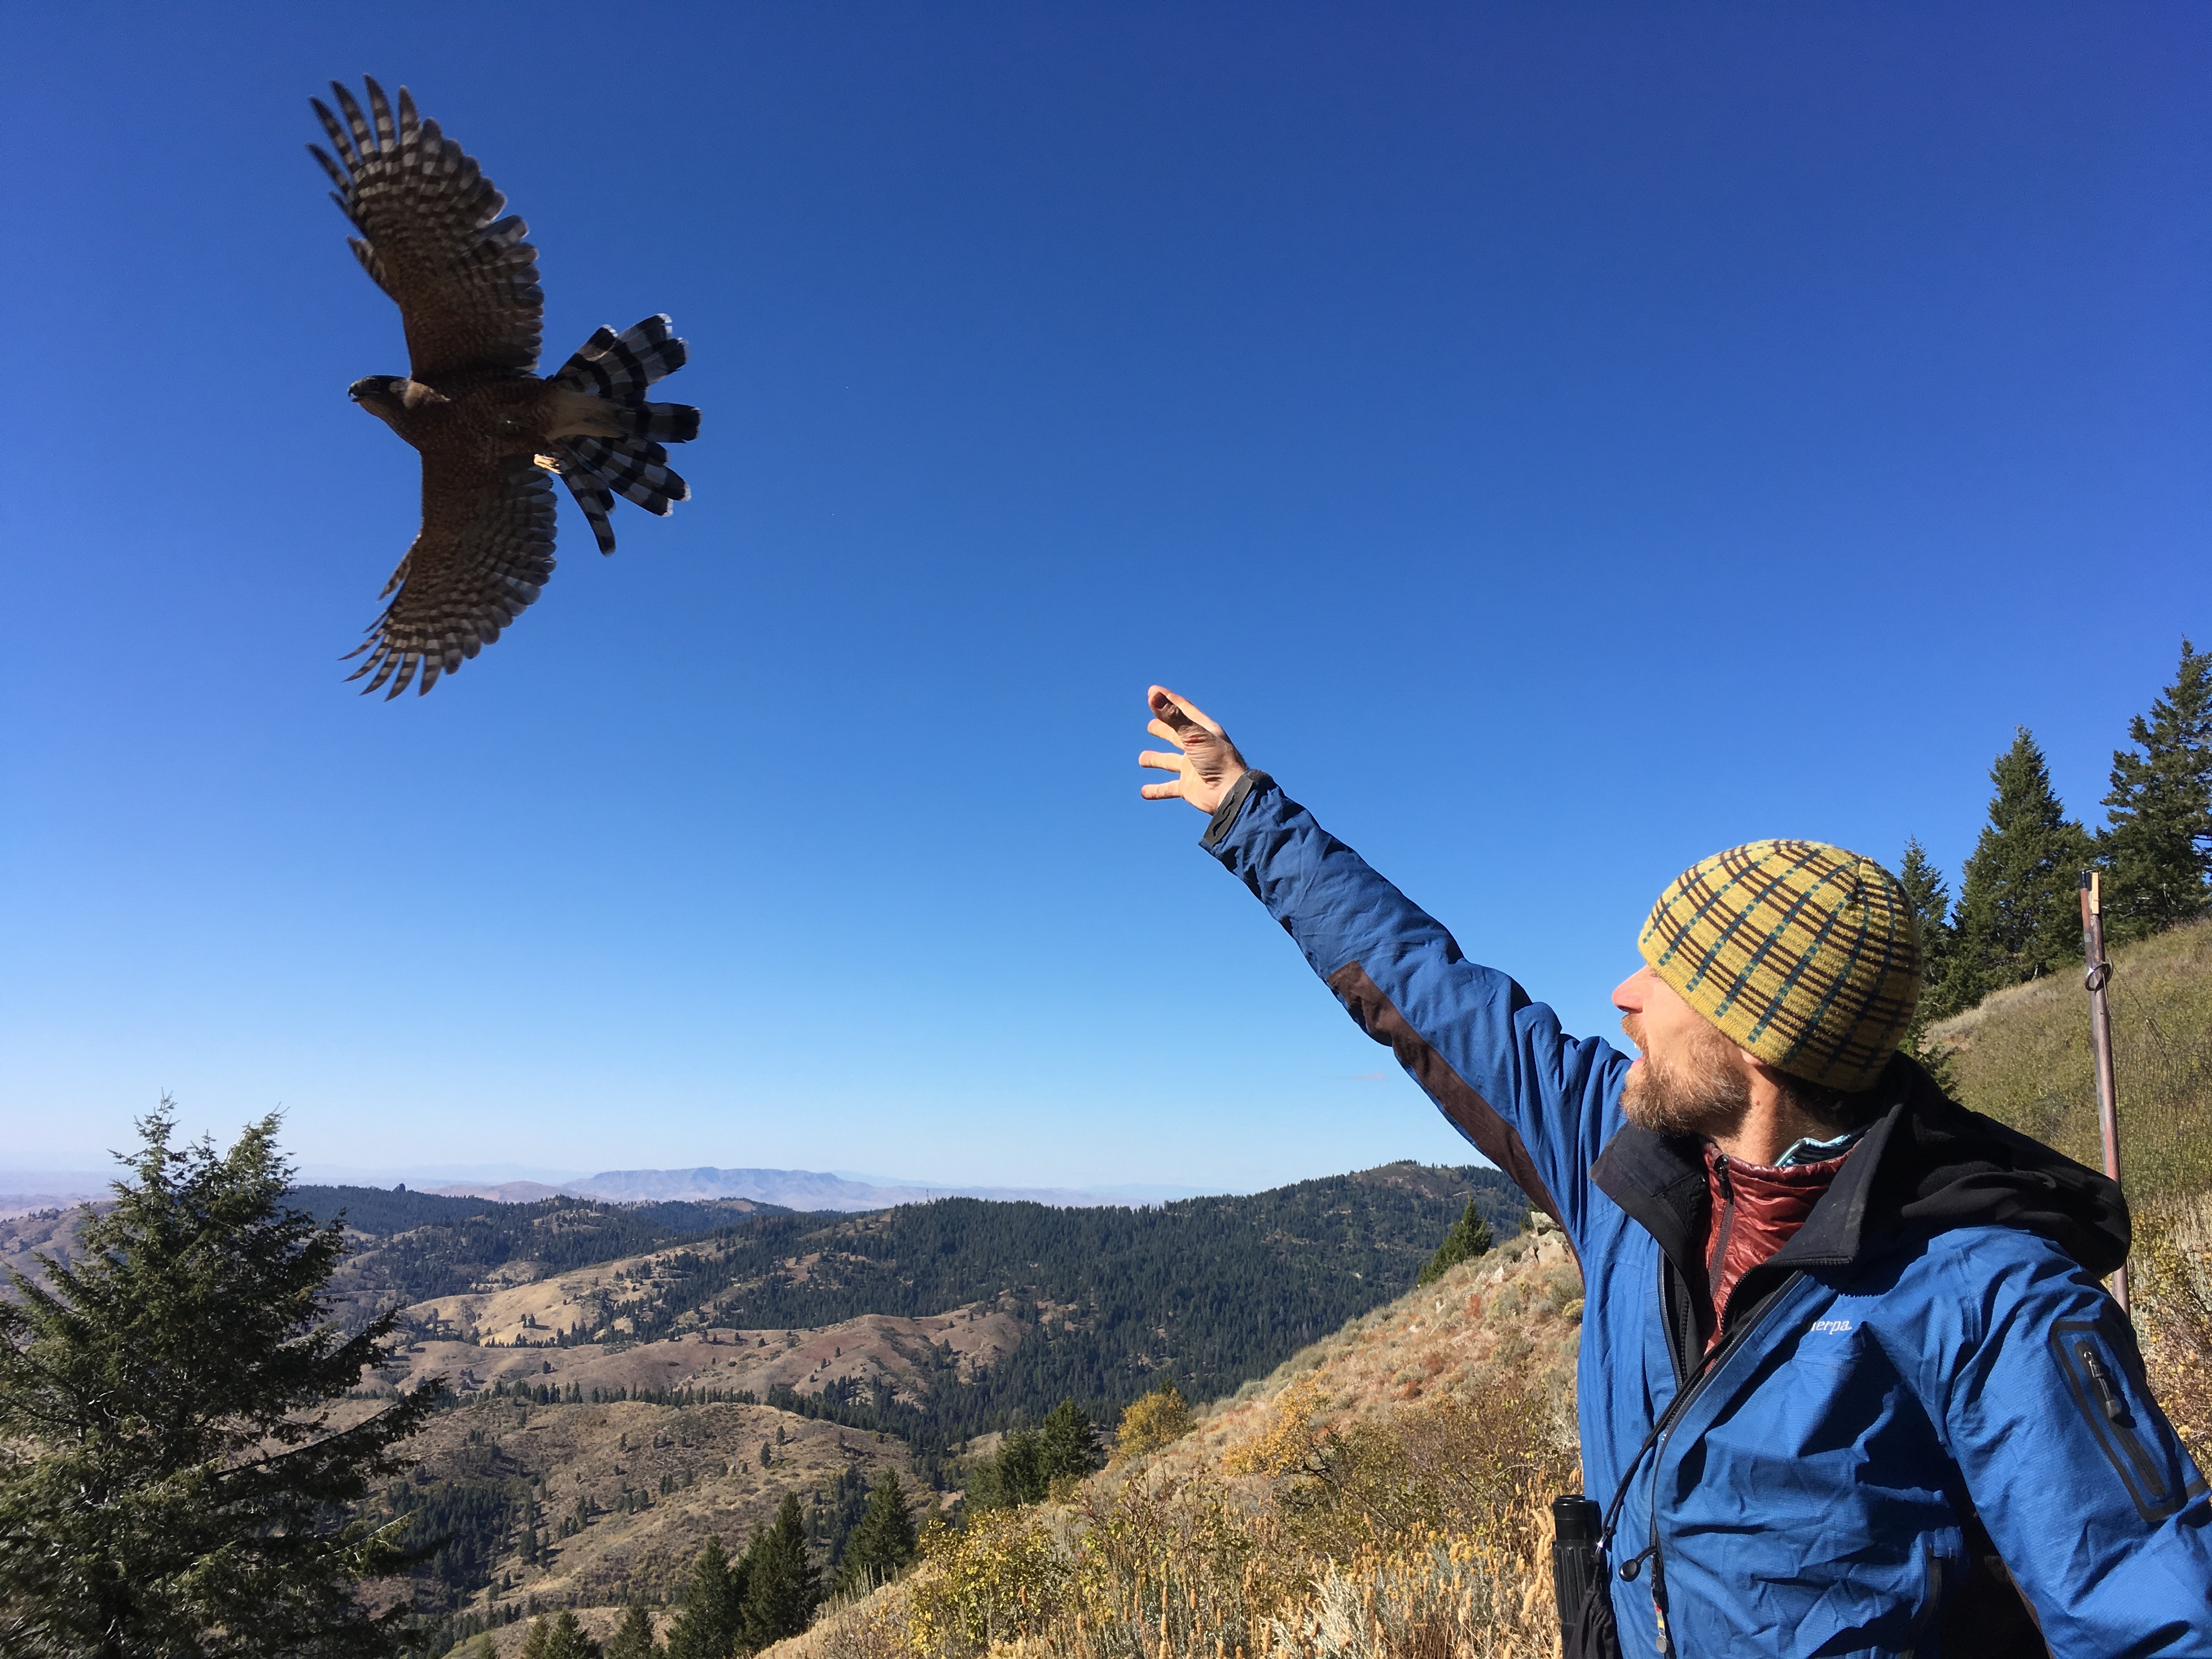 a man stands with arm outstretched and hand open. A Cooper's Hawk spreads its wings in flight in front of him